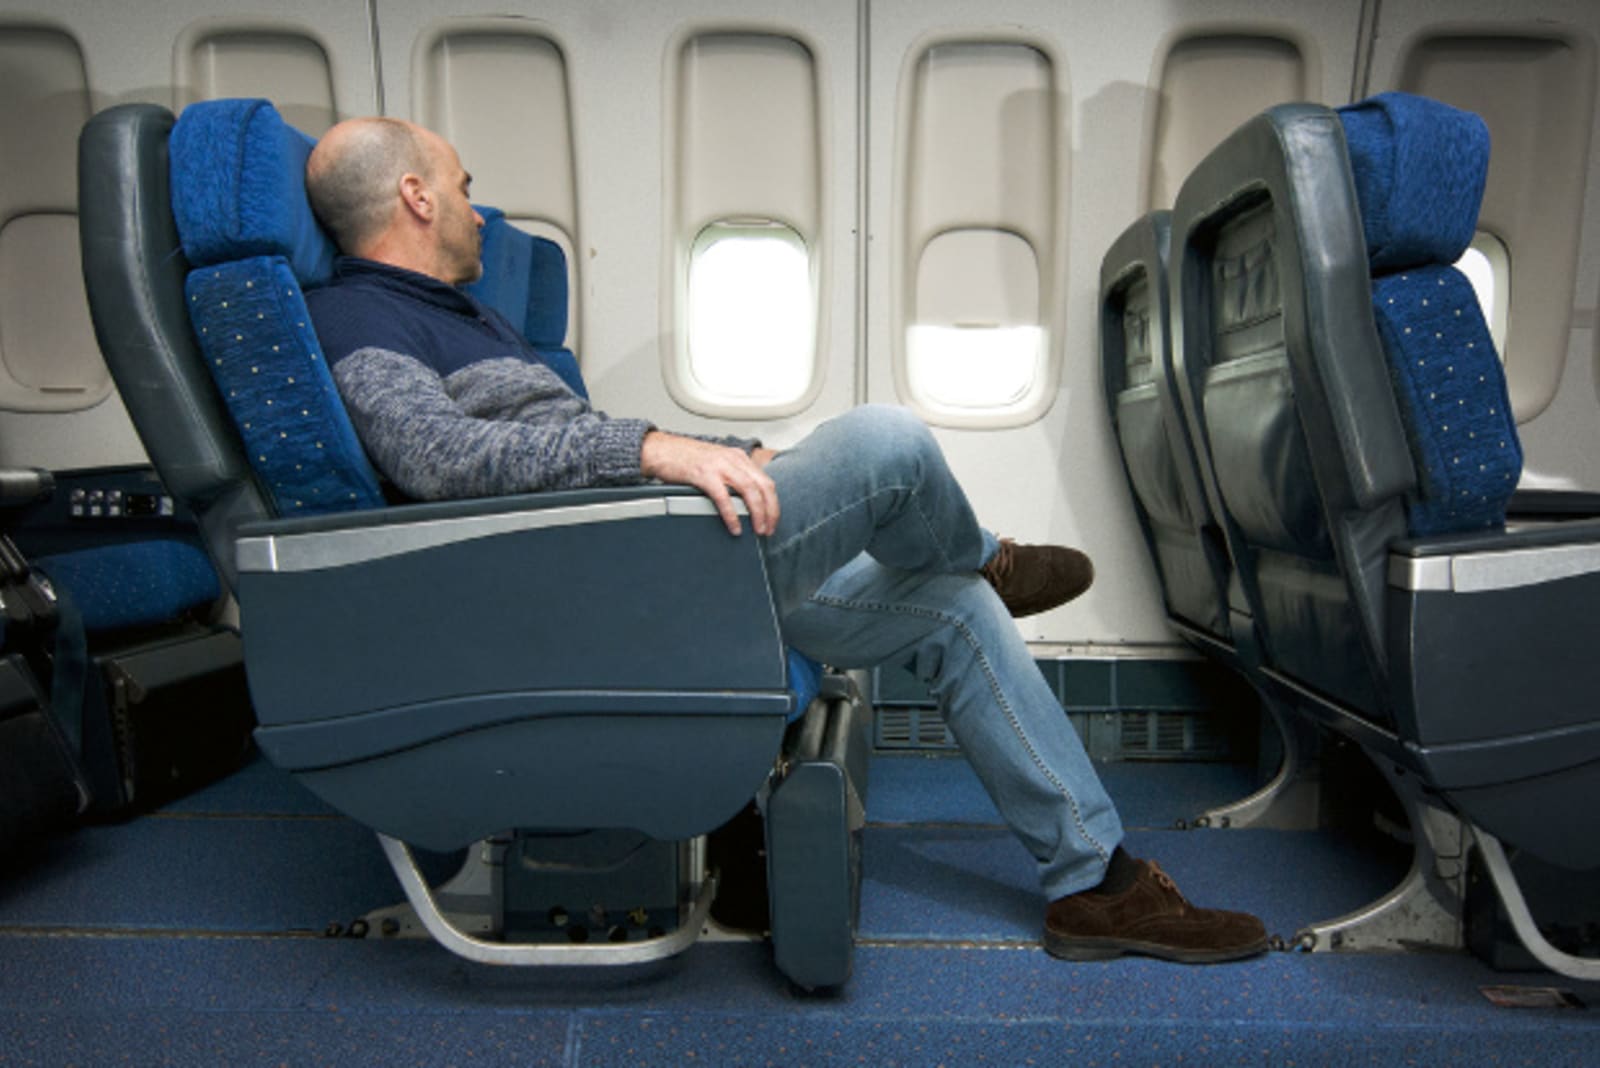 Person sitting in an Airline seat showing how spacious the leg room 